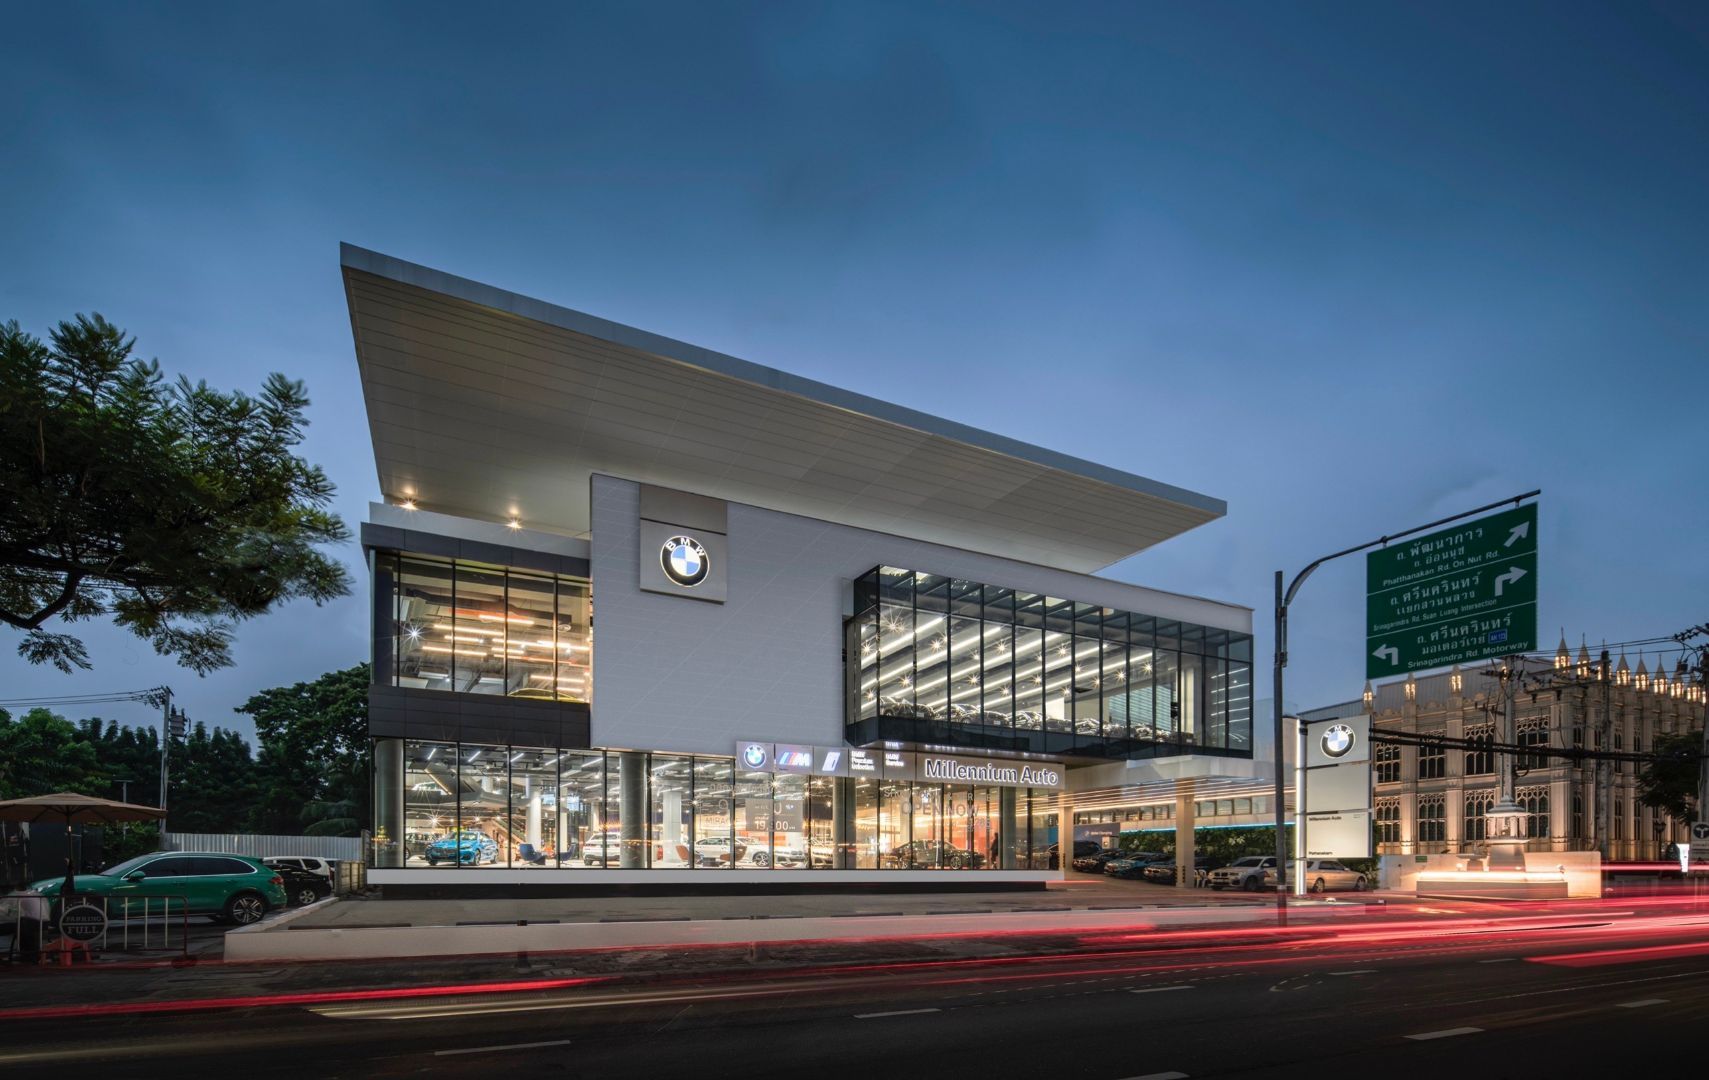 Millennium Auto Group introduces first-ever state-of-the-art showroom with new design concept of Retail Next’ in Southeast Asia, at BMW Millennium Auto Pattanakarn-Srinakarin Creating seamless customer experiences with exclusive 5 senses journey